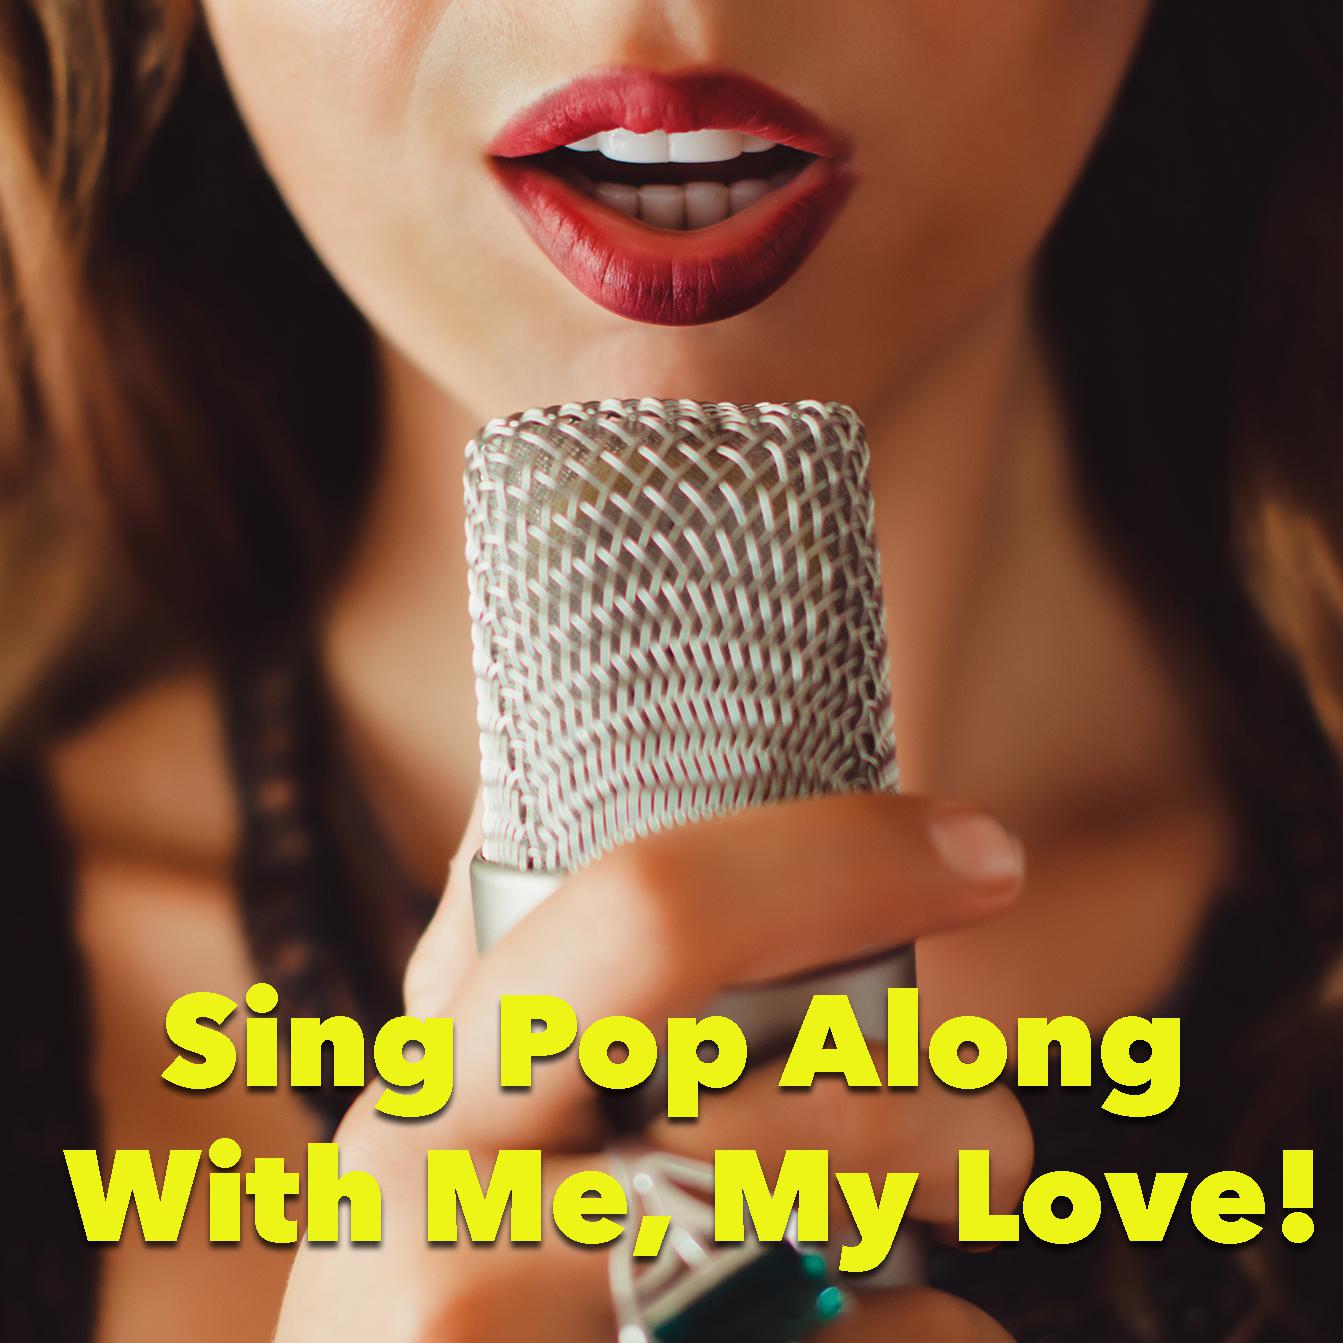 Sing Pop Along With Me, My Love!